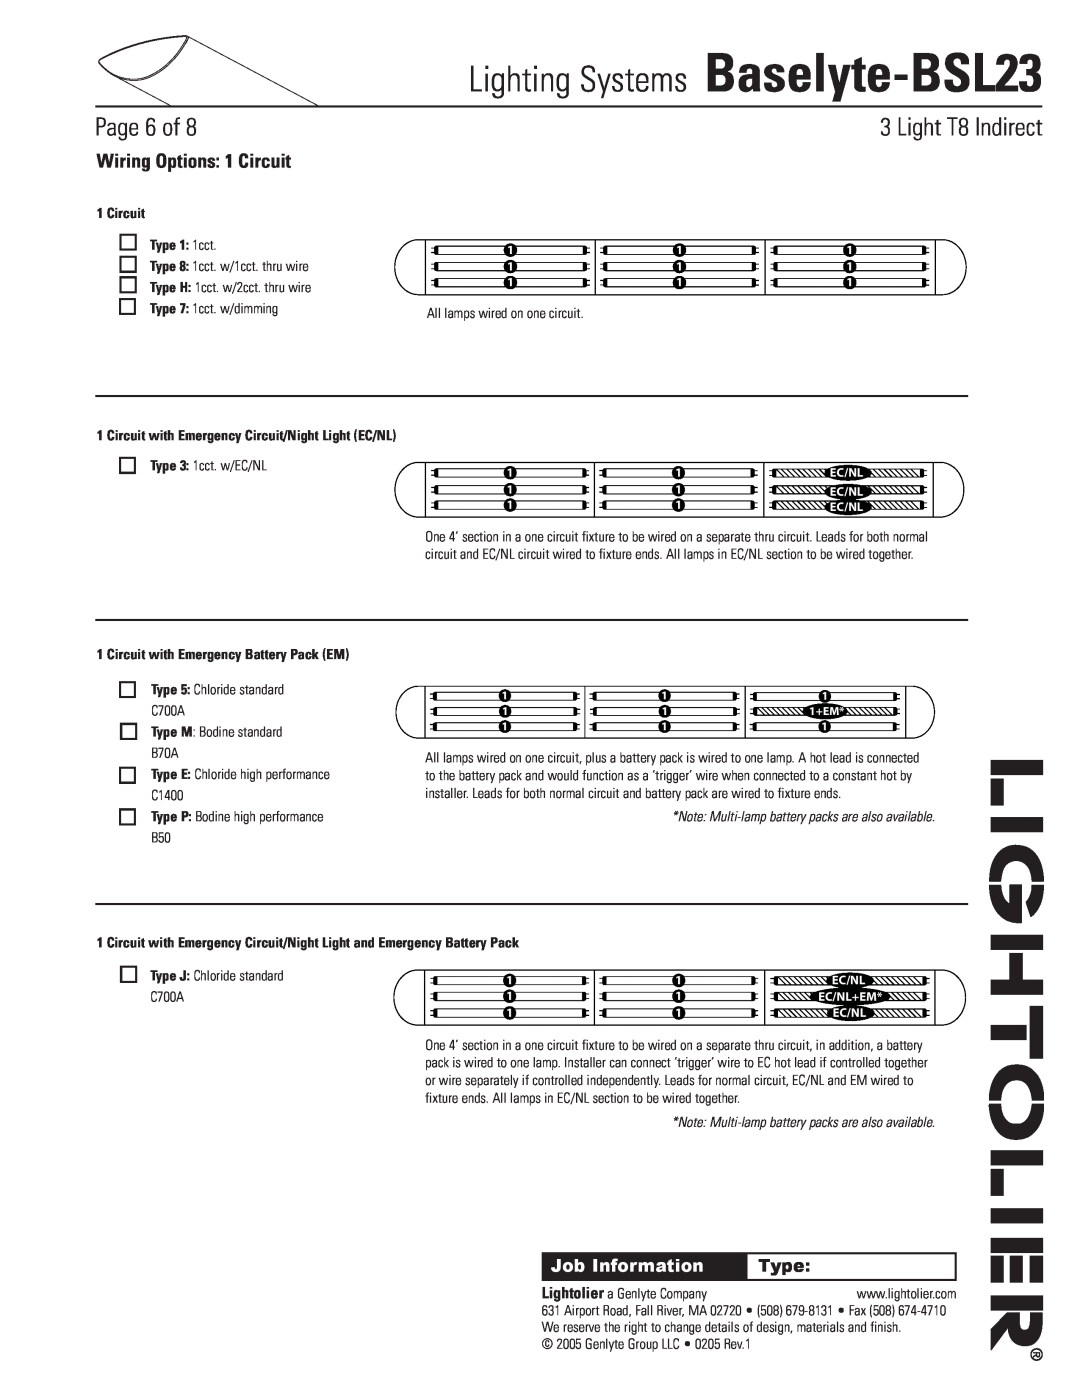 Lightolier Baselyte-BSL23 Wiring Options 1 Circuit, Circuit Type 1 1cct, Circuit with Emergency Battery Pack EM, Page of 